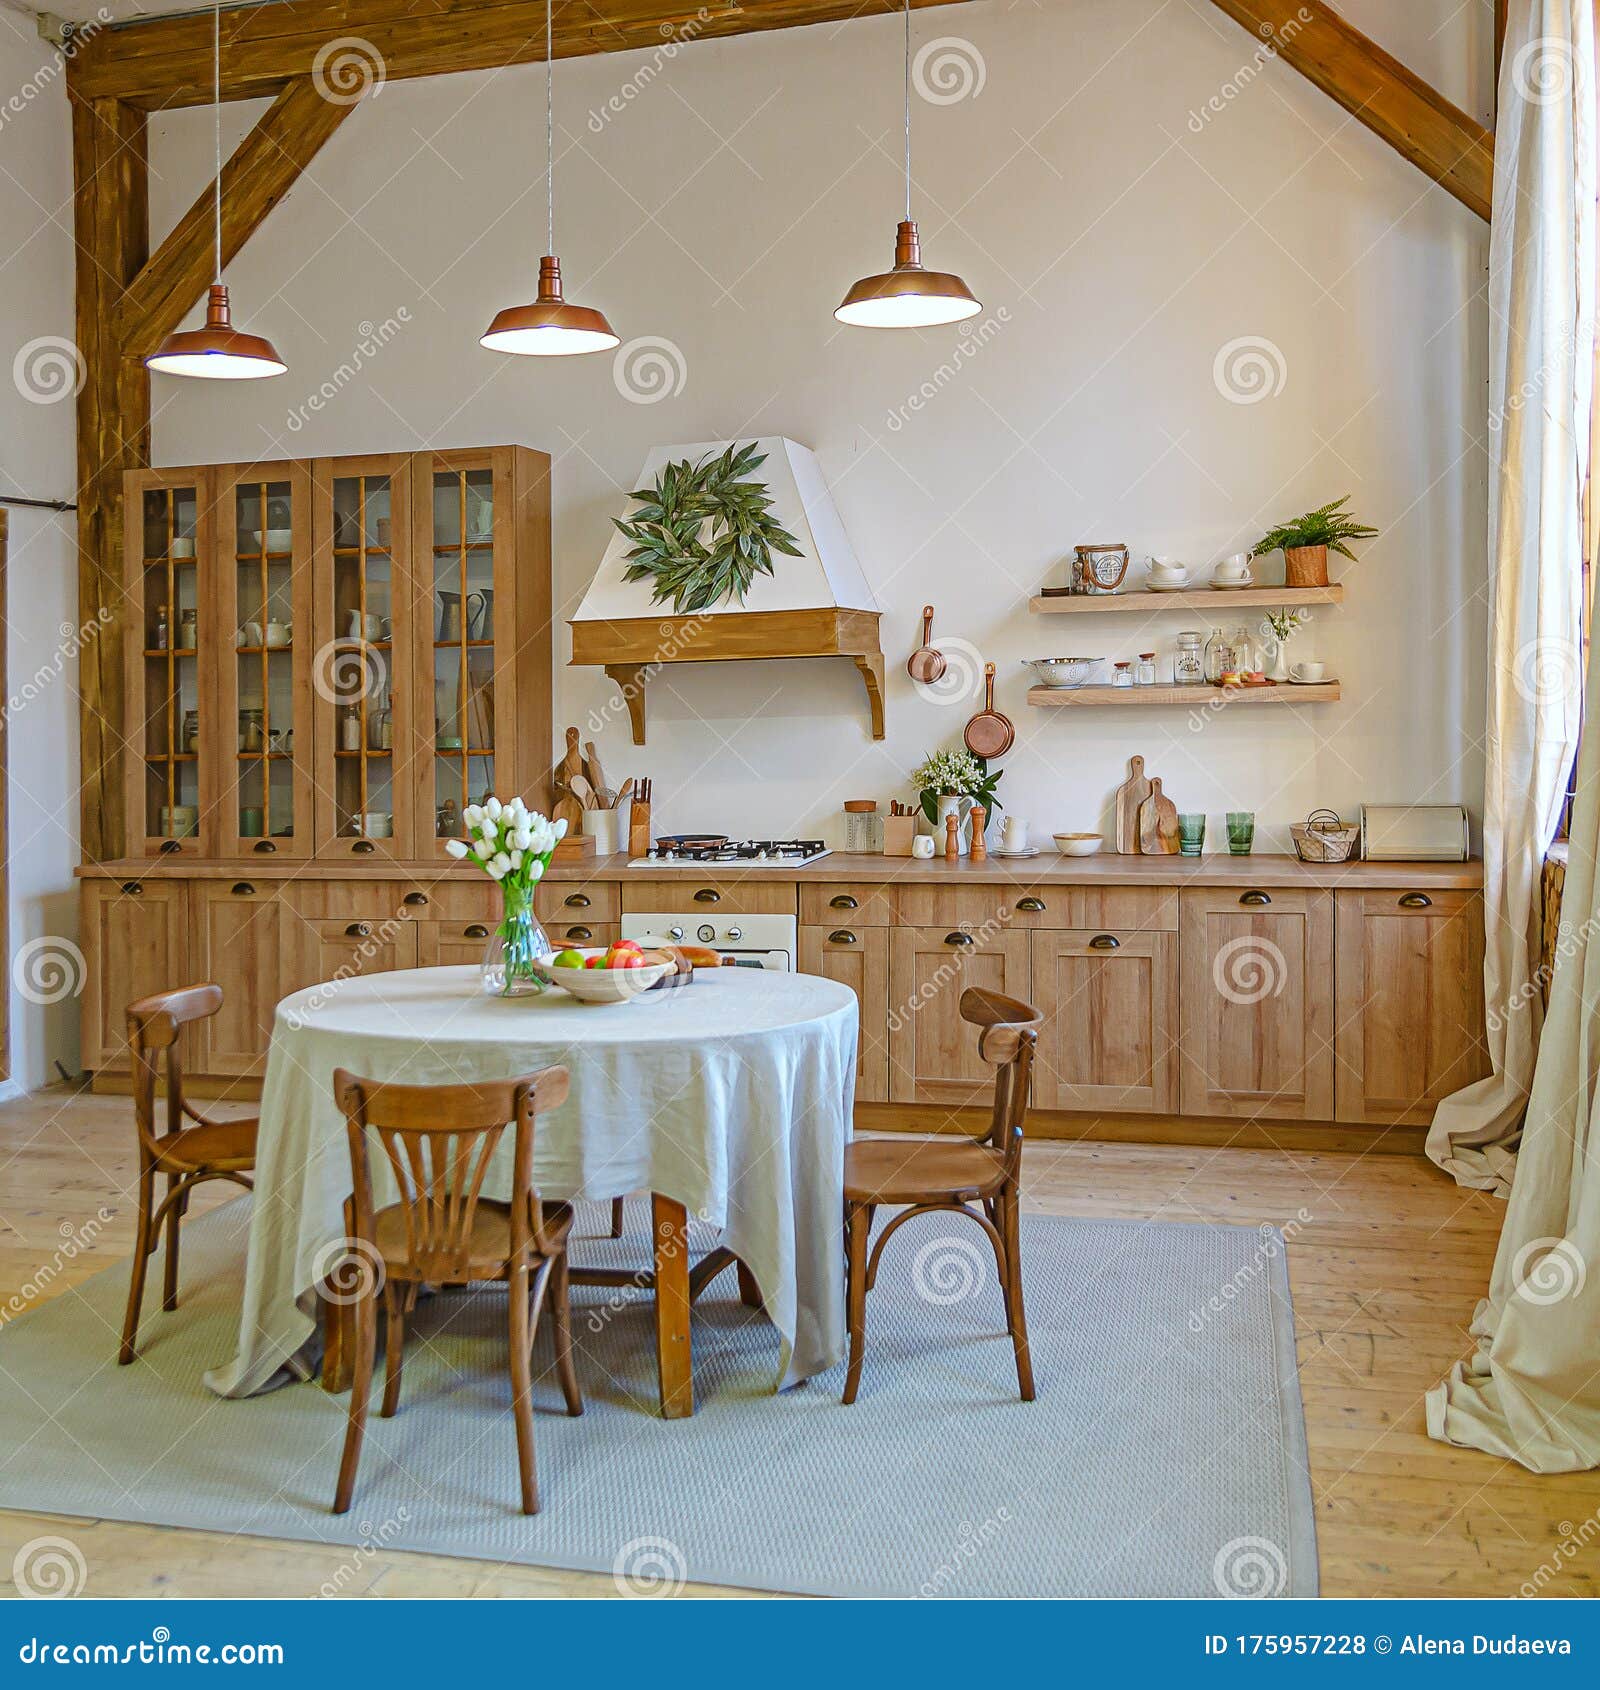 The Interior of the Kitchen in a Rustic Style, Scandinavian Style ...